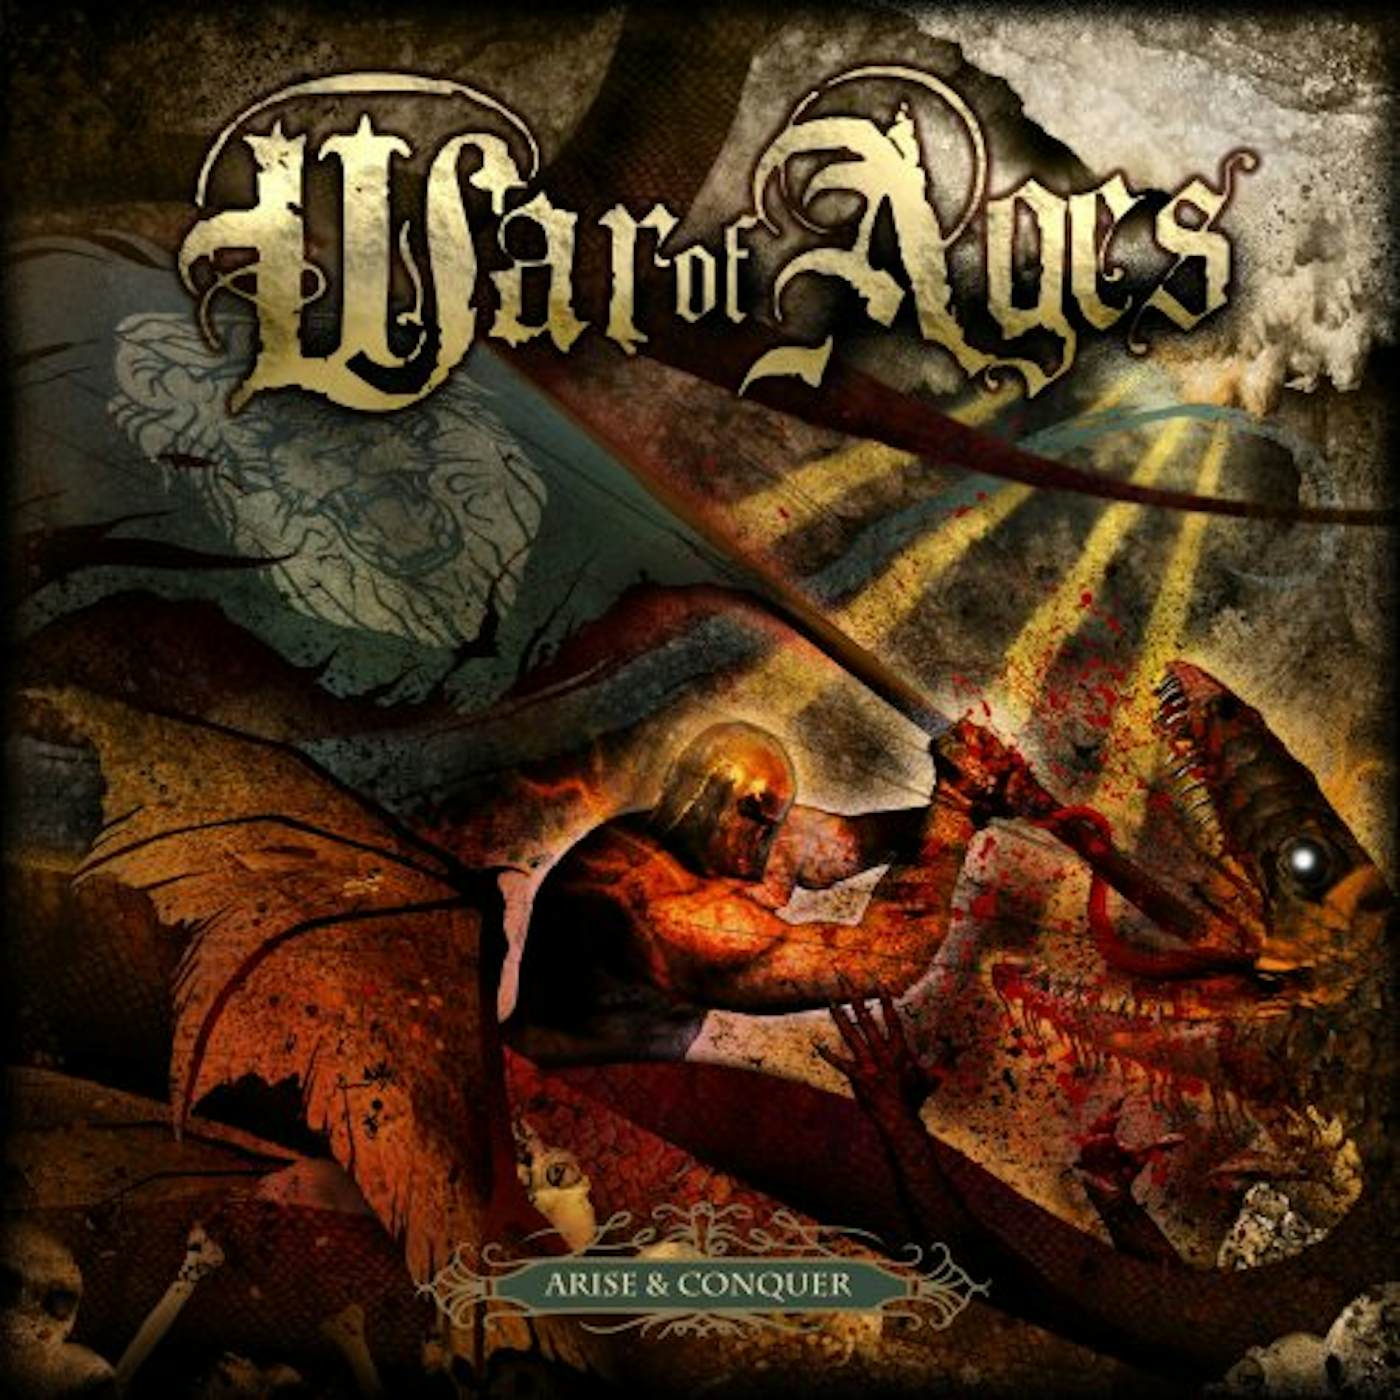 War Of Ages ARISE & CONQUER CD